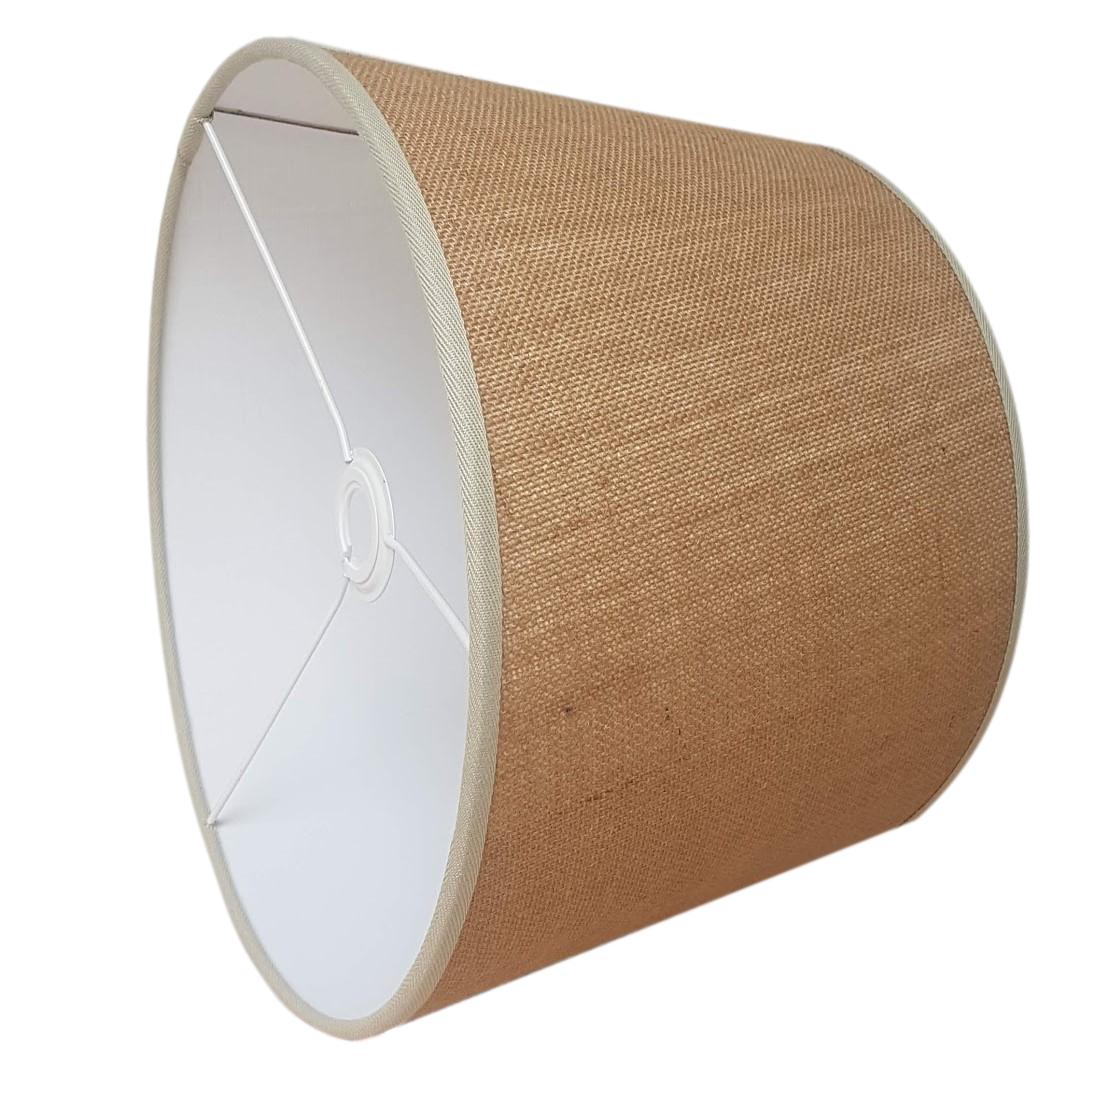 Munro and Kerr natural hessian tapered drum lampshade with coloured binding trim